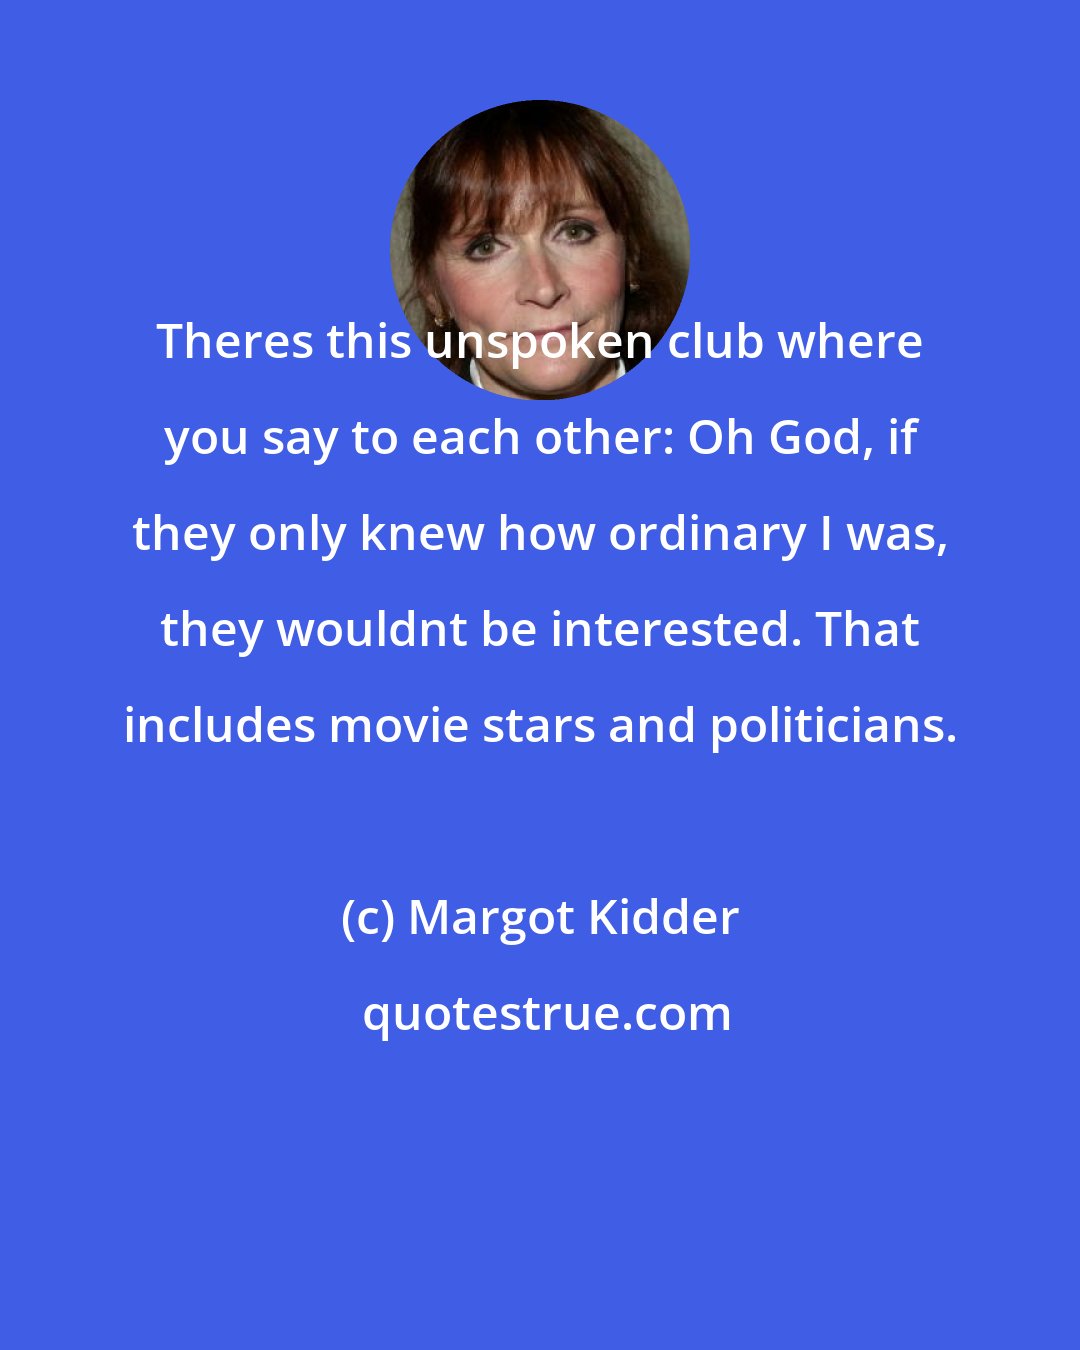 Margot Kidder: Theres this unspoken club where you say to each other: Oh God, if they only knew how ordinary I was, they wouldnt be interested. That includes movie stars and politicians.